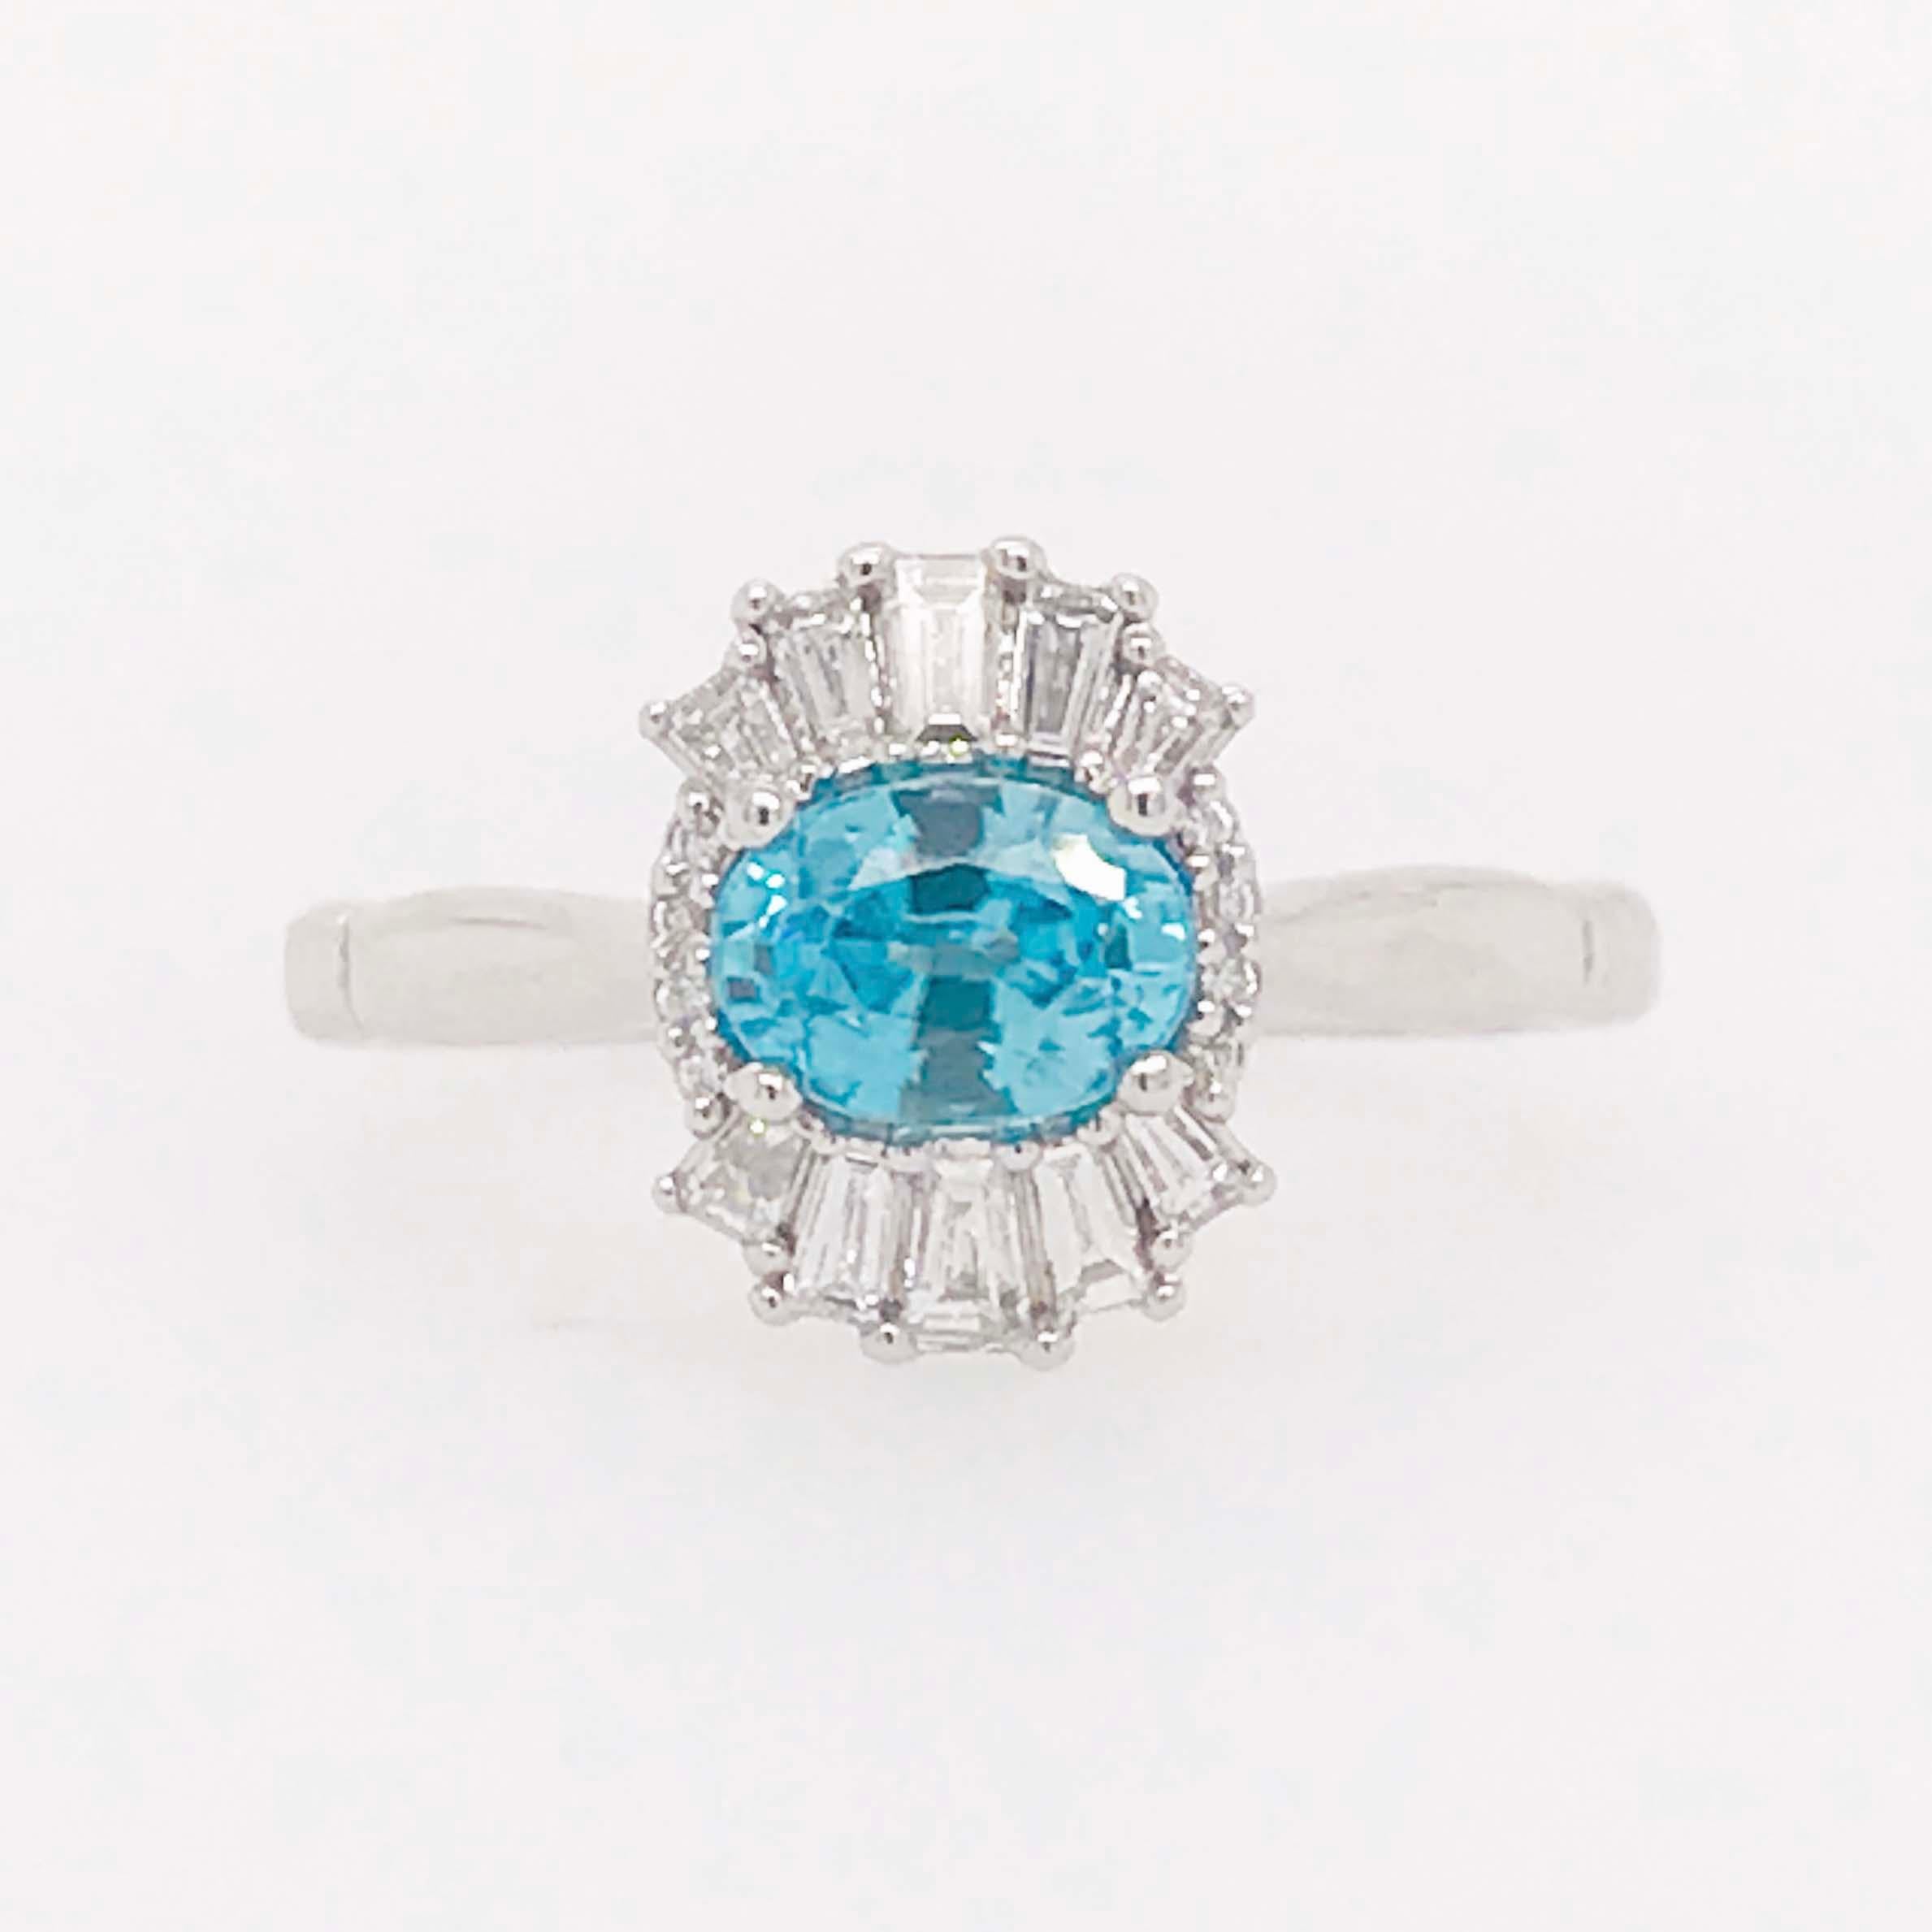 Revival 1.45ct Blue Zircon and Diamond Ring Round and Baguette Diamonds 14K White Gold For Sale